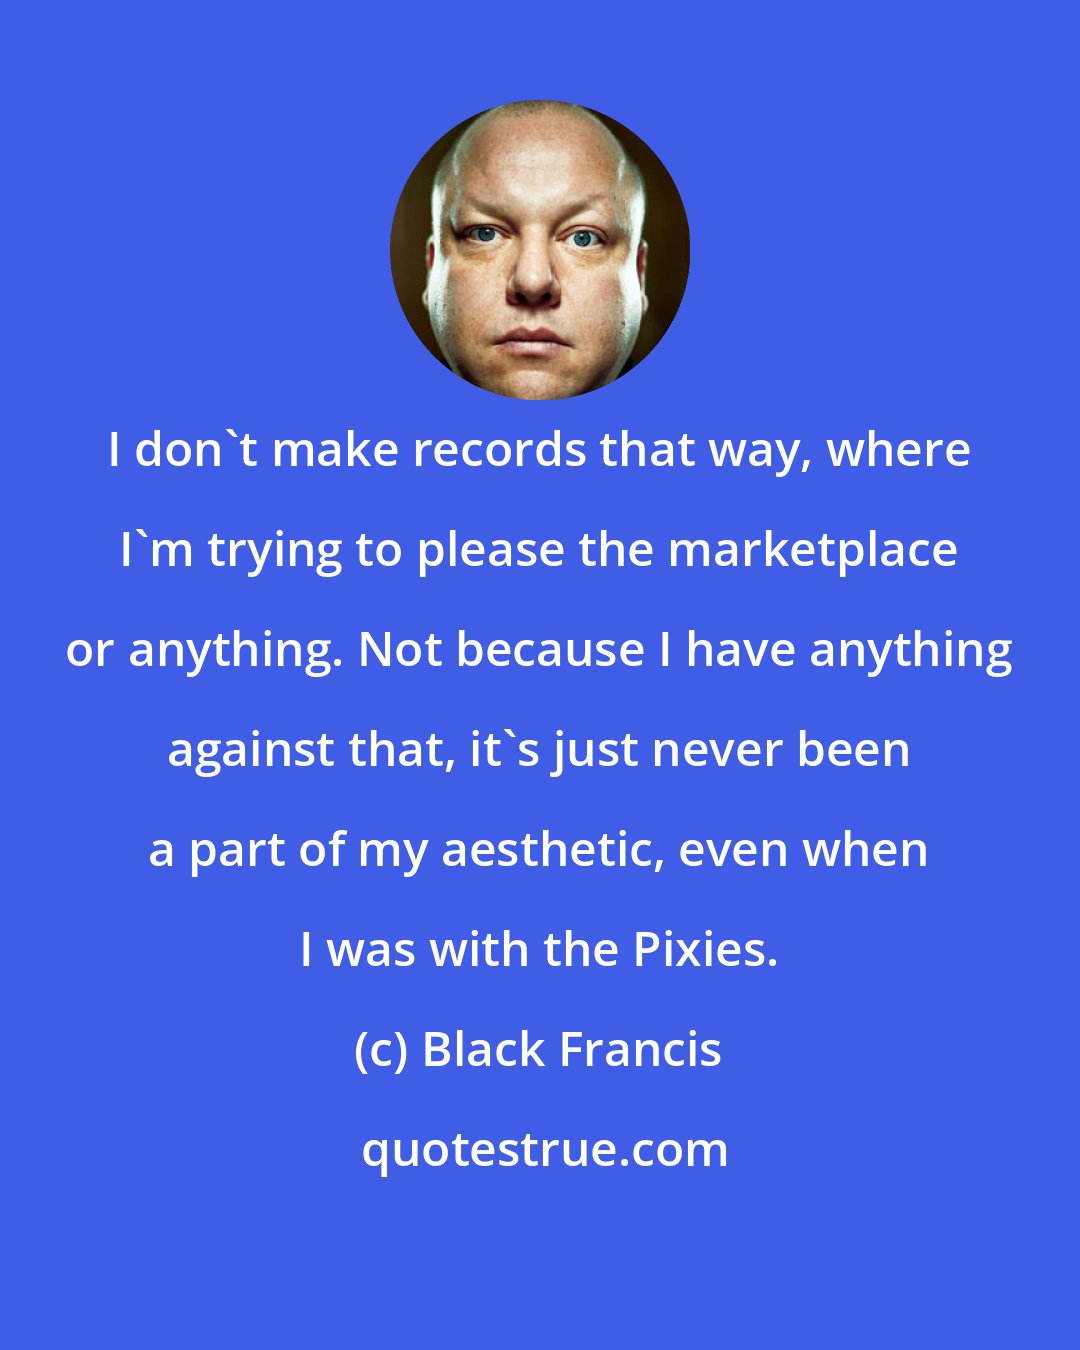 Black Francis: I don't make records that way, where I'm trying to please the marketplace or anything. Not because I have anything against that, it's just never been a part of my aesthetic, even when I was with the Pixies.